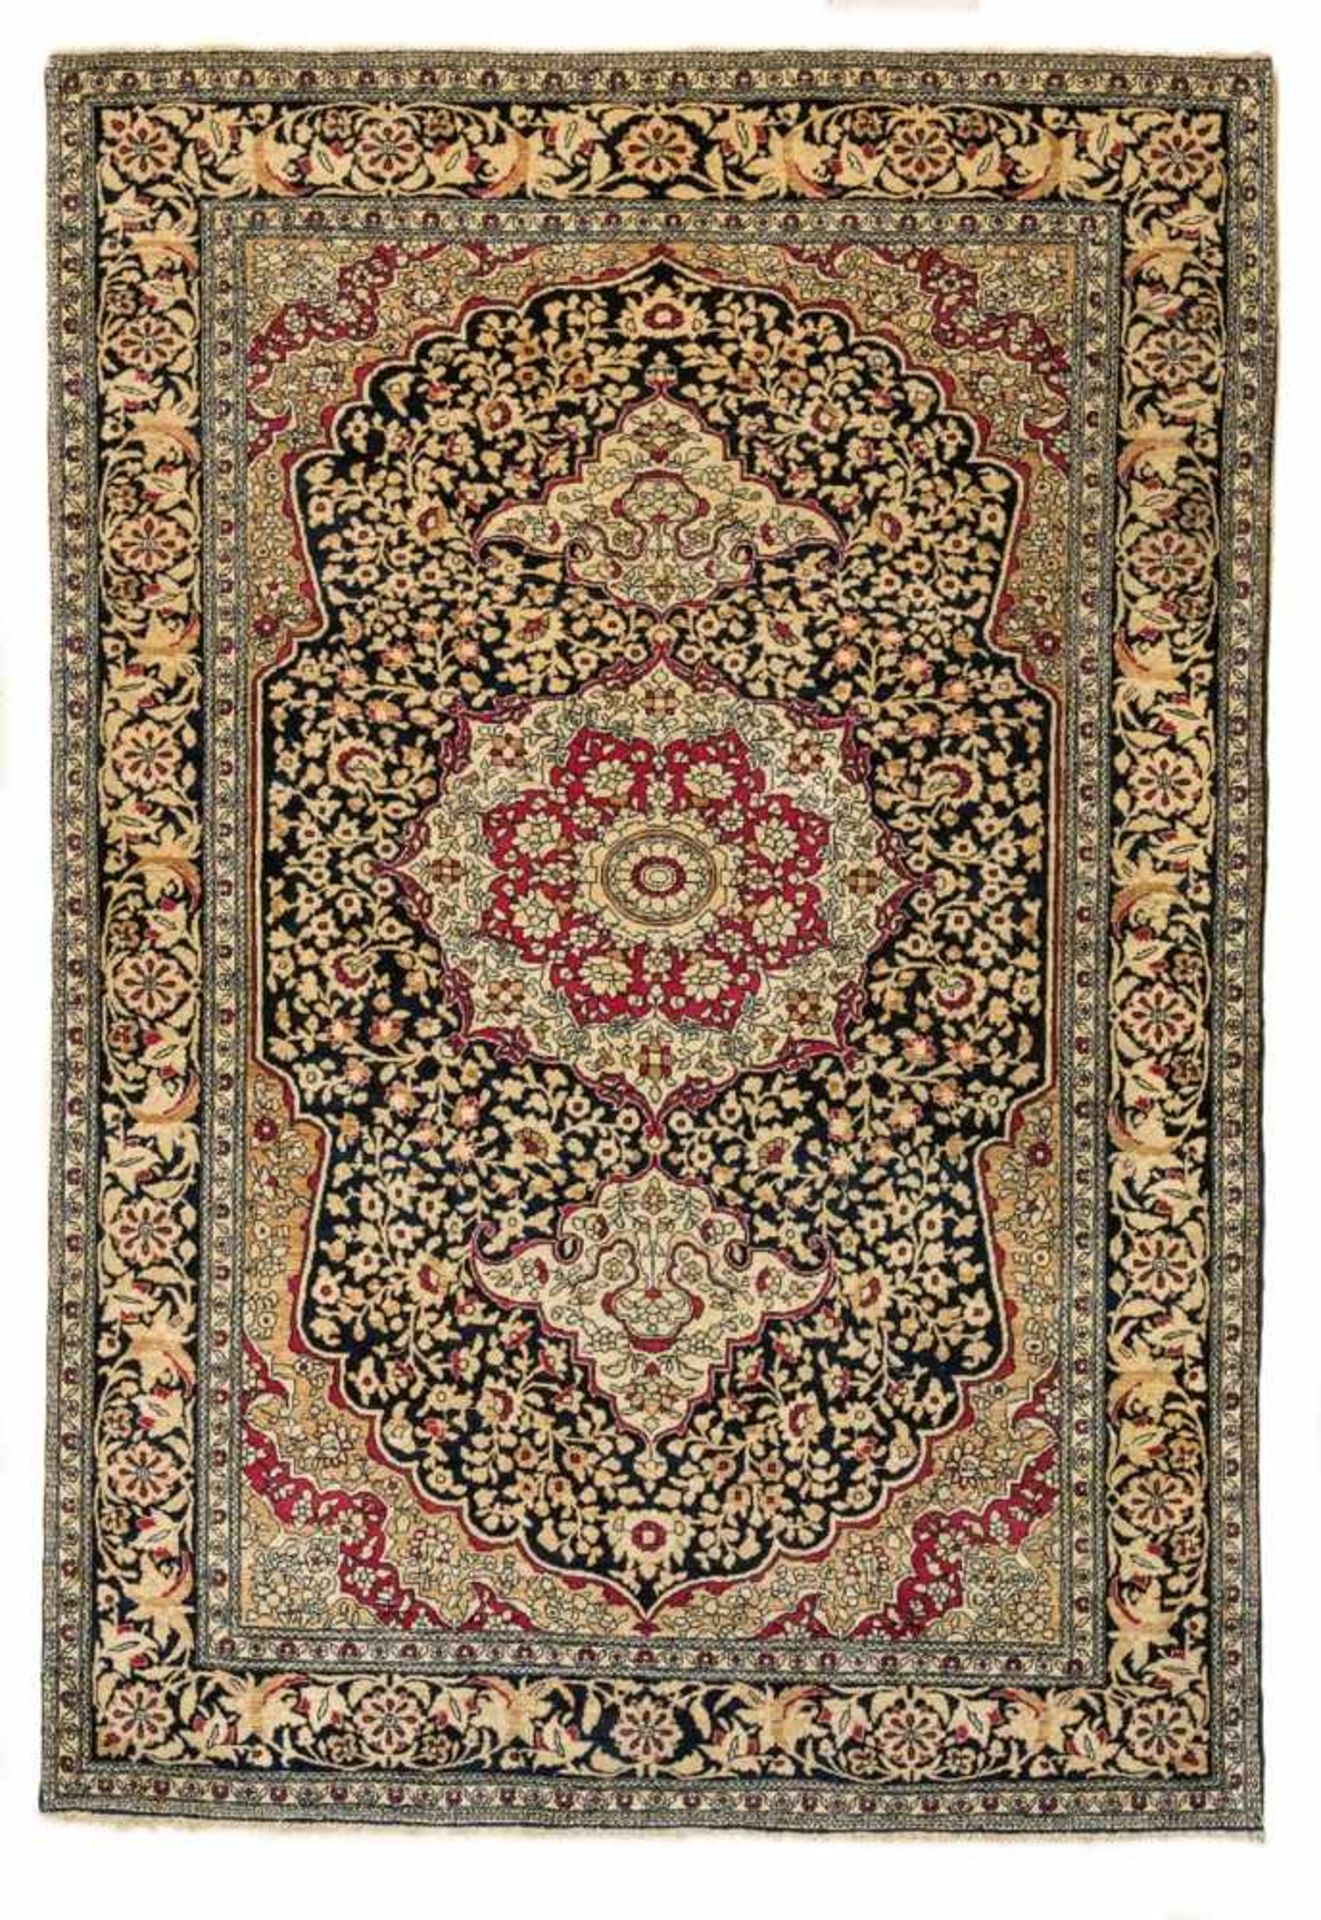 An Iranian Isfahan carpetWoll and cotton. With a medallion on dark blue ground. Slightly